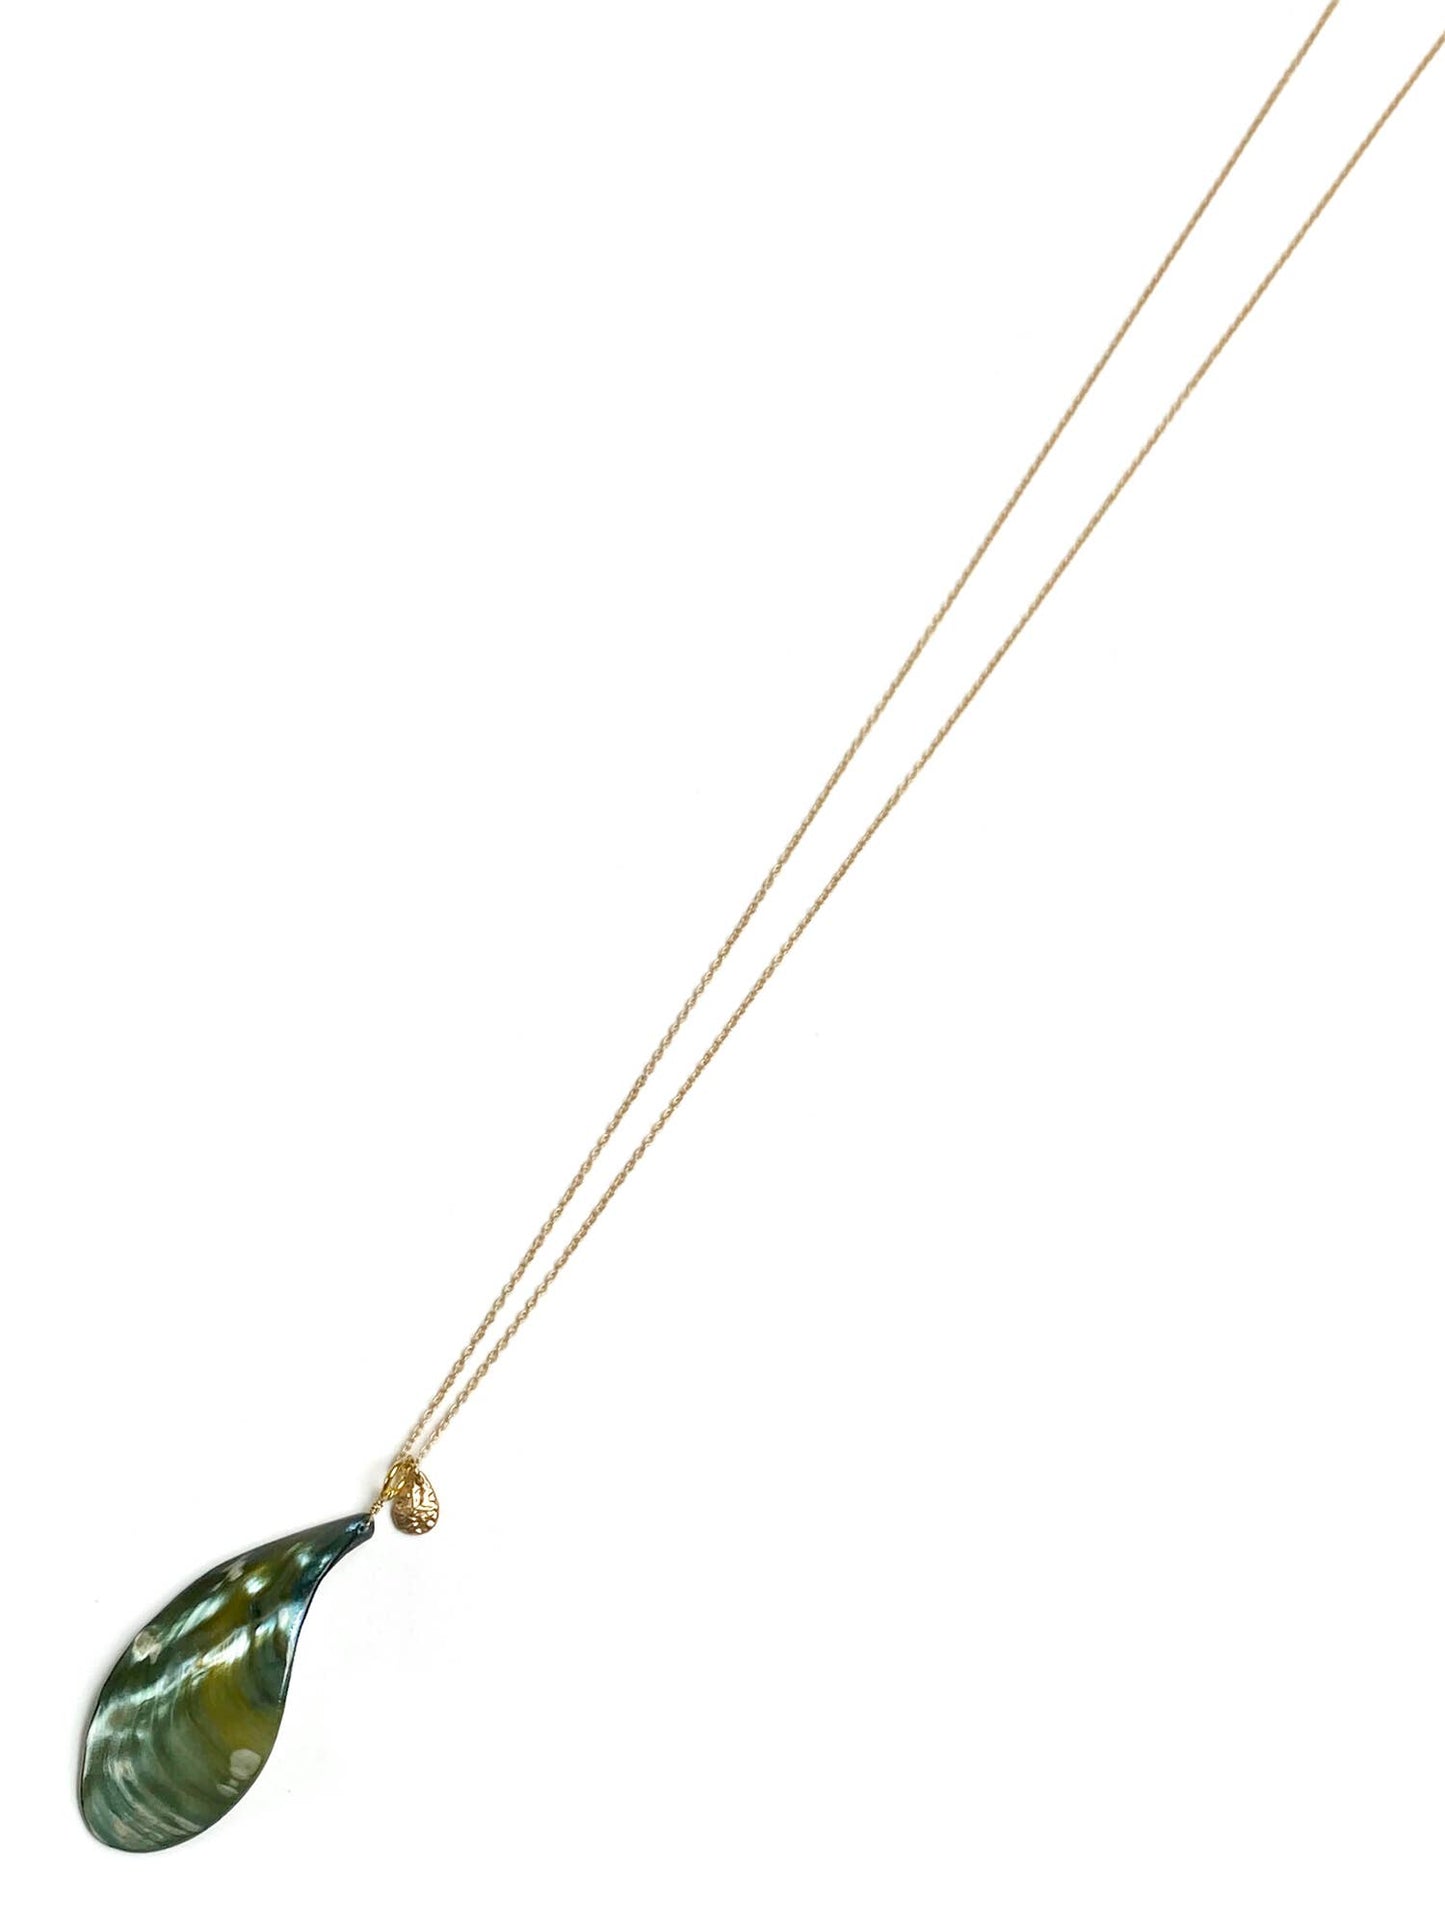 Gracie Rose Designs - Matte Gold Polished Green Shell Pendant Necklace